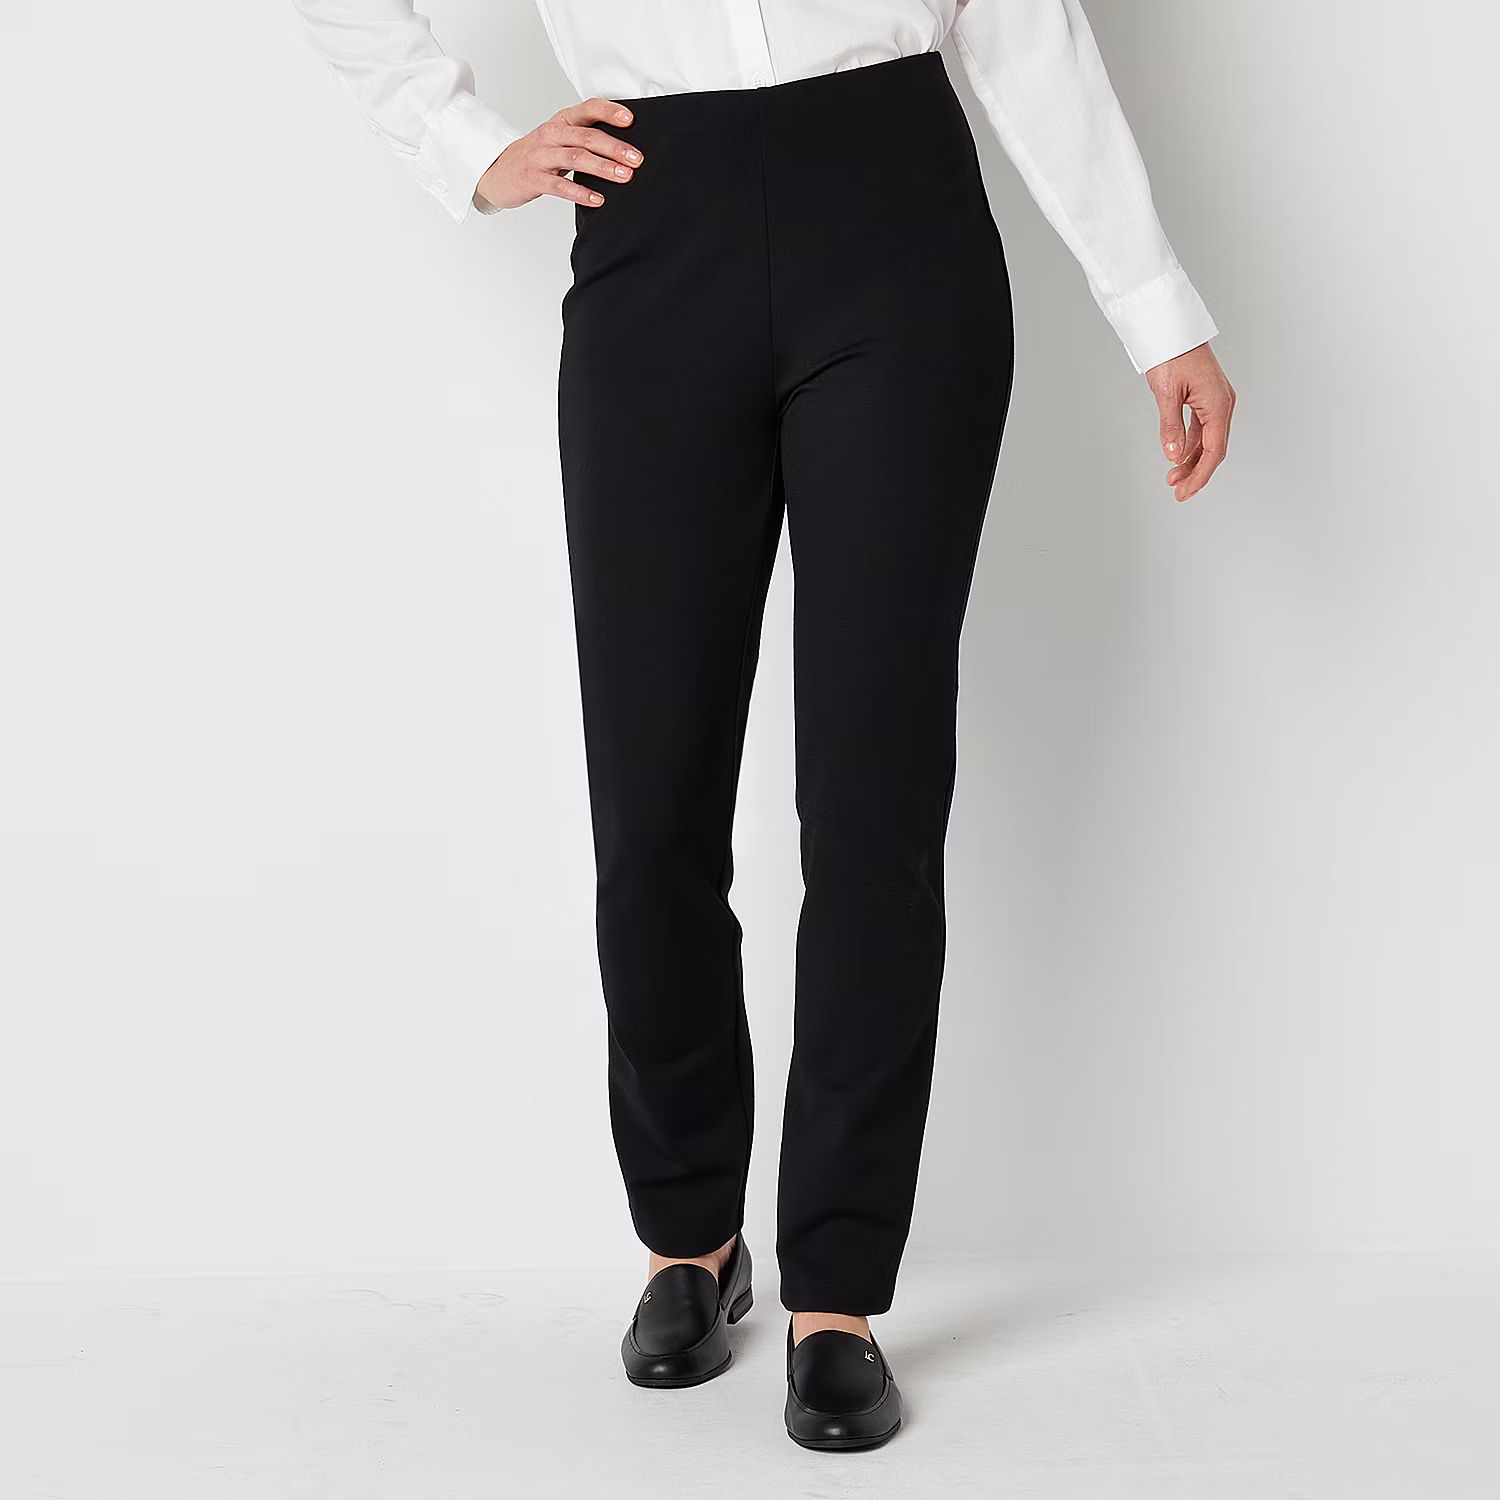 Liz Claiborne Alexis Ponte Womens Straight Pull-On Pants | JCPenney